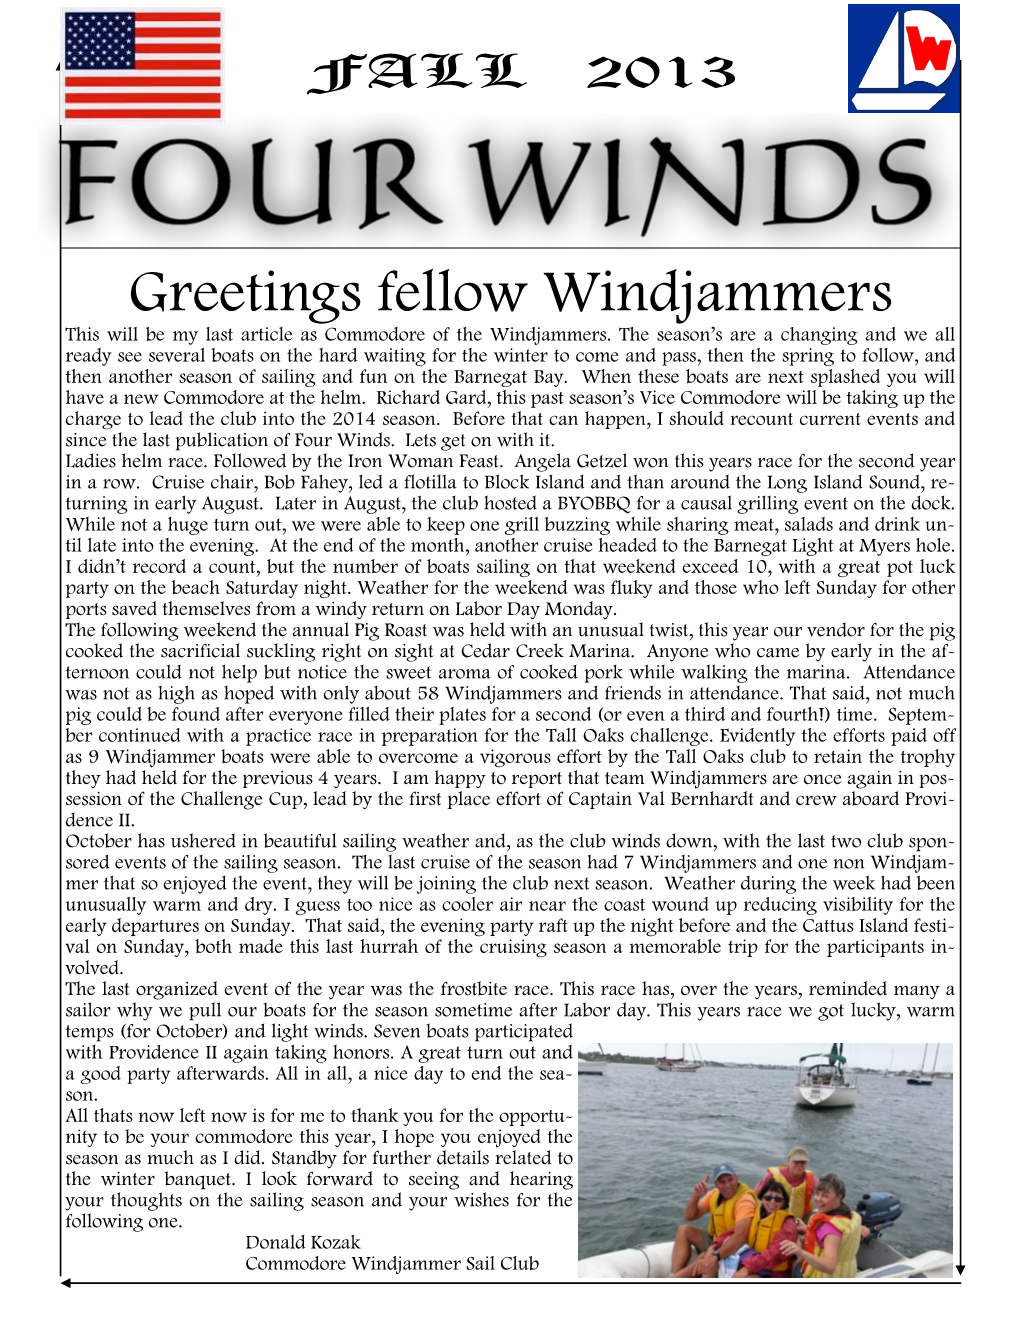 Greetings Fellow Windjammers This Will Be My Last Article As Commodore of the Windjammers